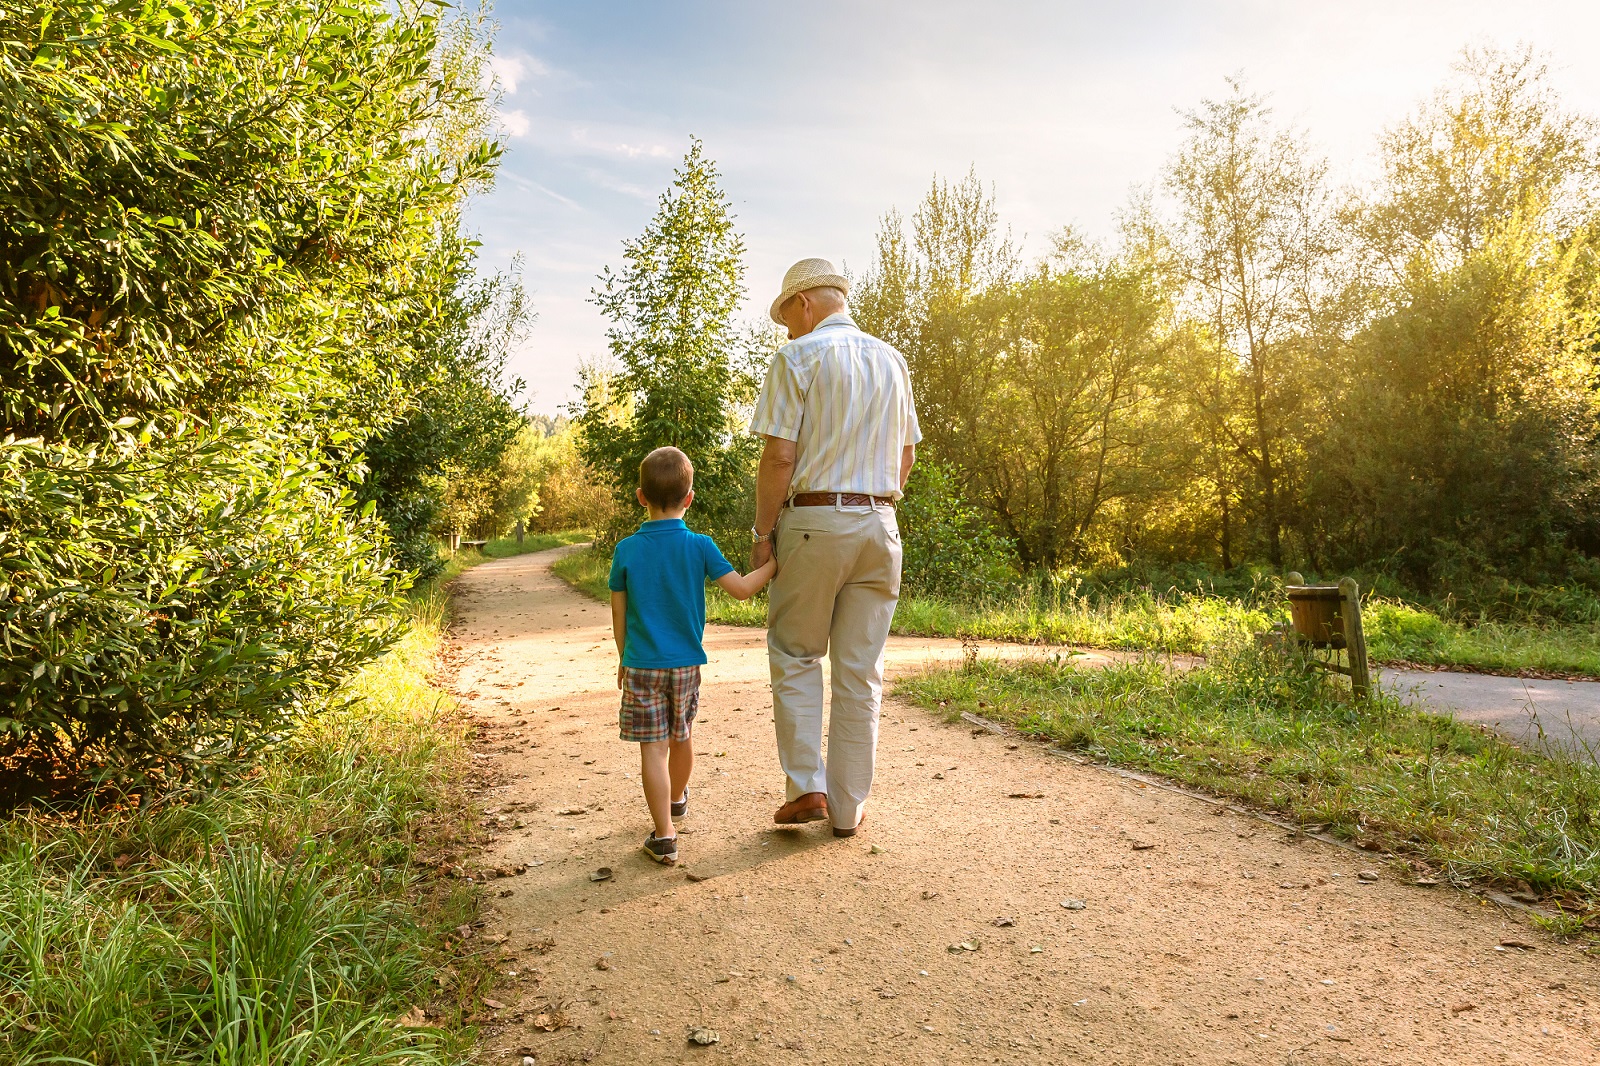 The back view of grandfather with hat and grandchild walking on a nature path